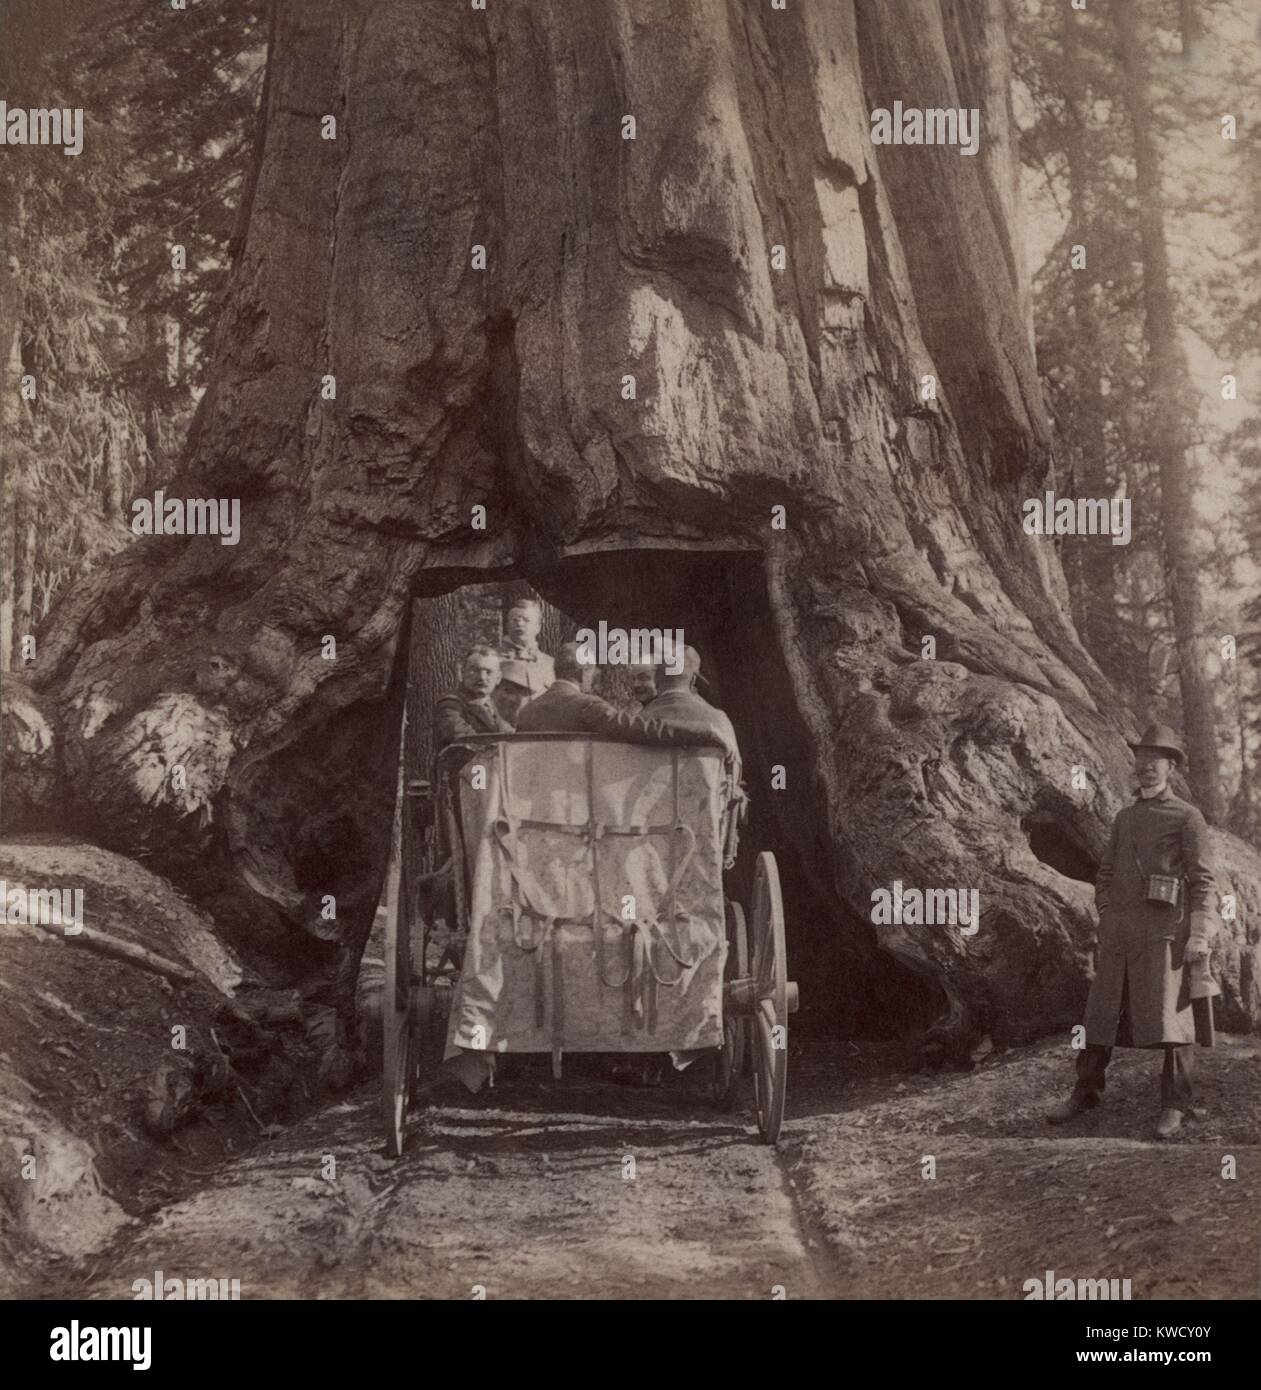 President Theodore Roosevelts carriage driving through the tunnel in Wawona, a giant sequoia. Mariposa Grove, California, May 15, 1903. That night, TR and Muir camped at the Mariposa Grove under the Grizzly Giant (BSLOC 2017 4 76) Stock Photo